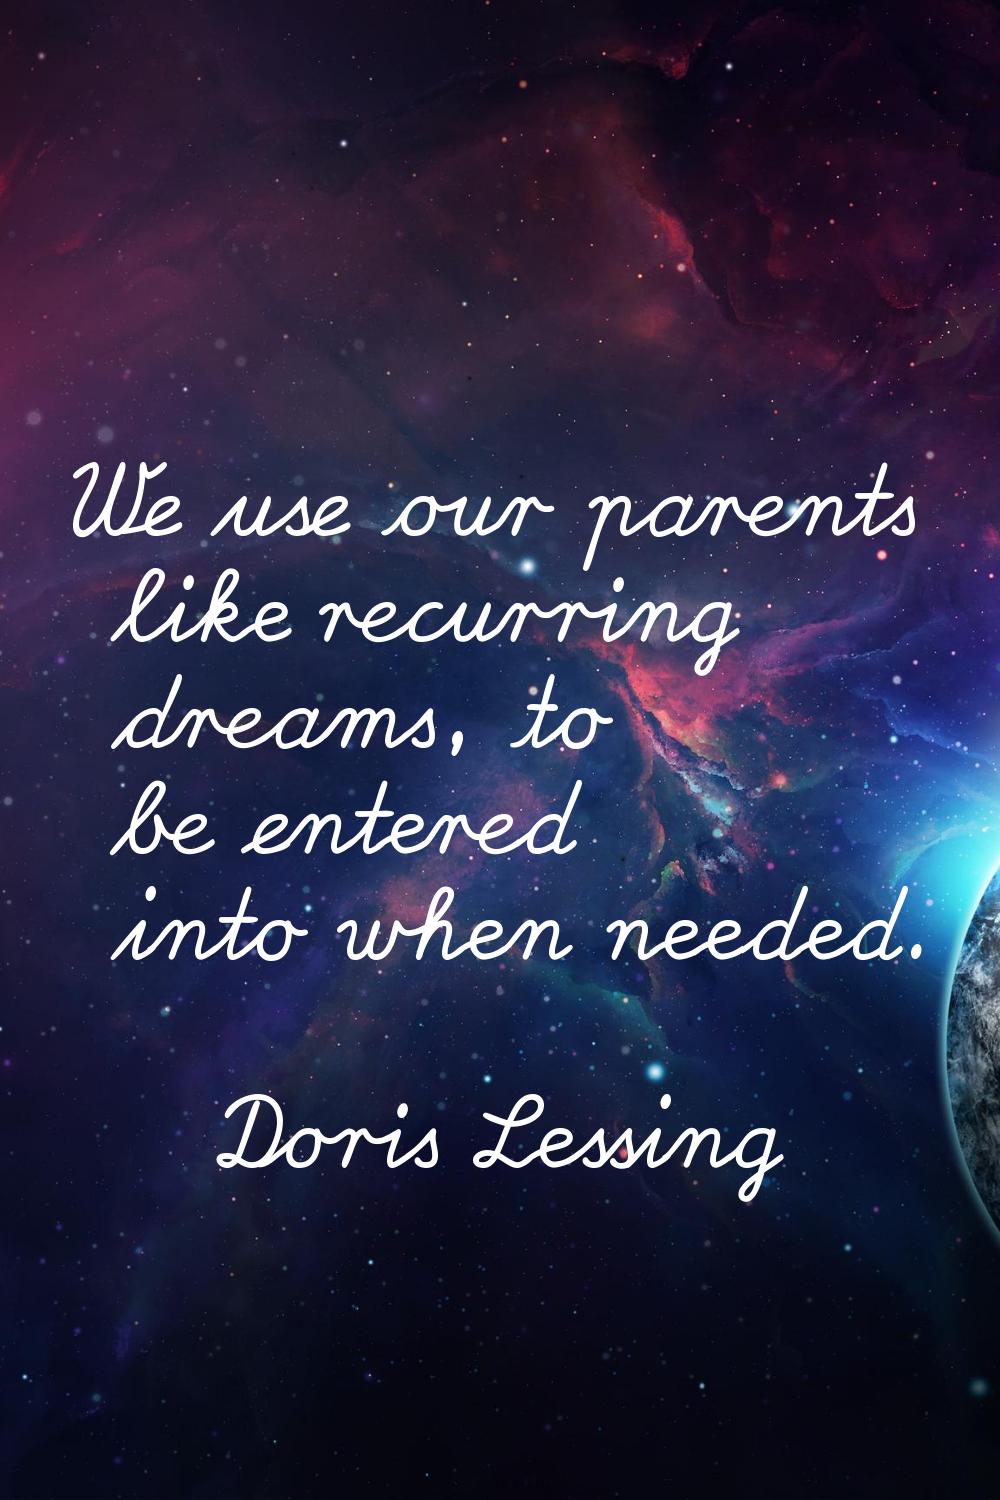 We use our parents like recurring dreams, to be entered into when needed.